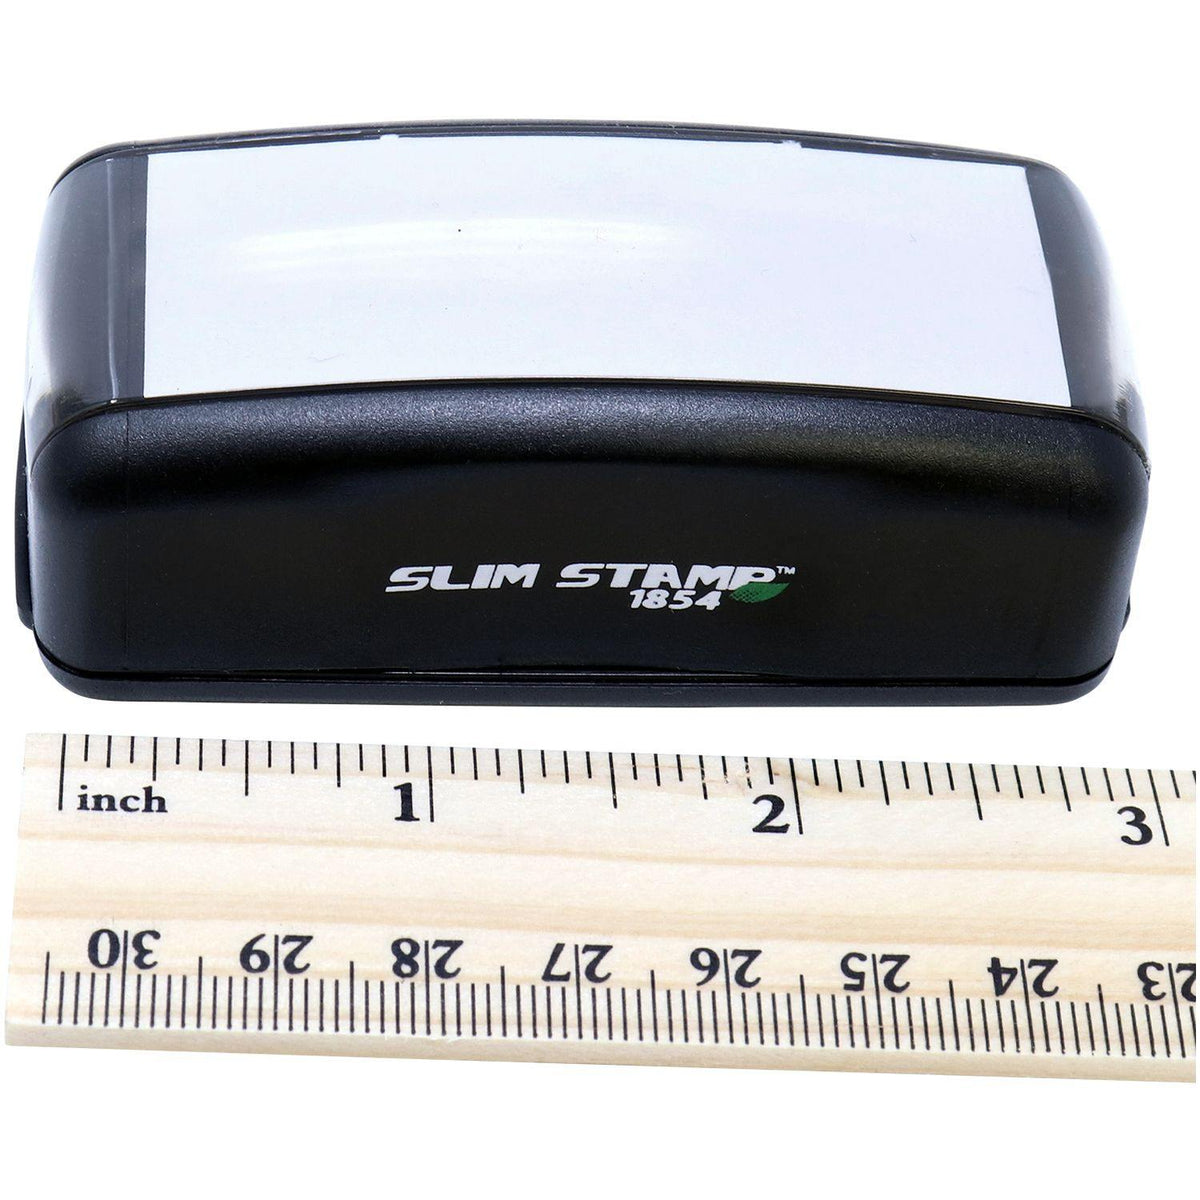 Measurement Large Pre-Inked E-Mail Stamp with Ruler